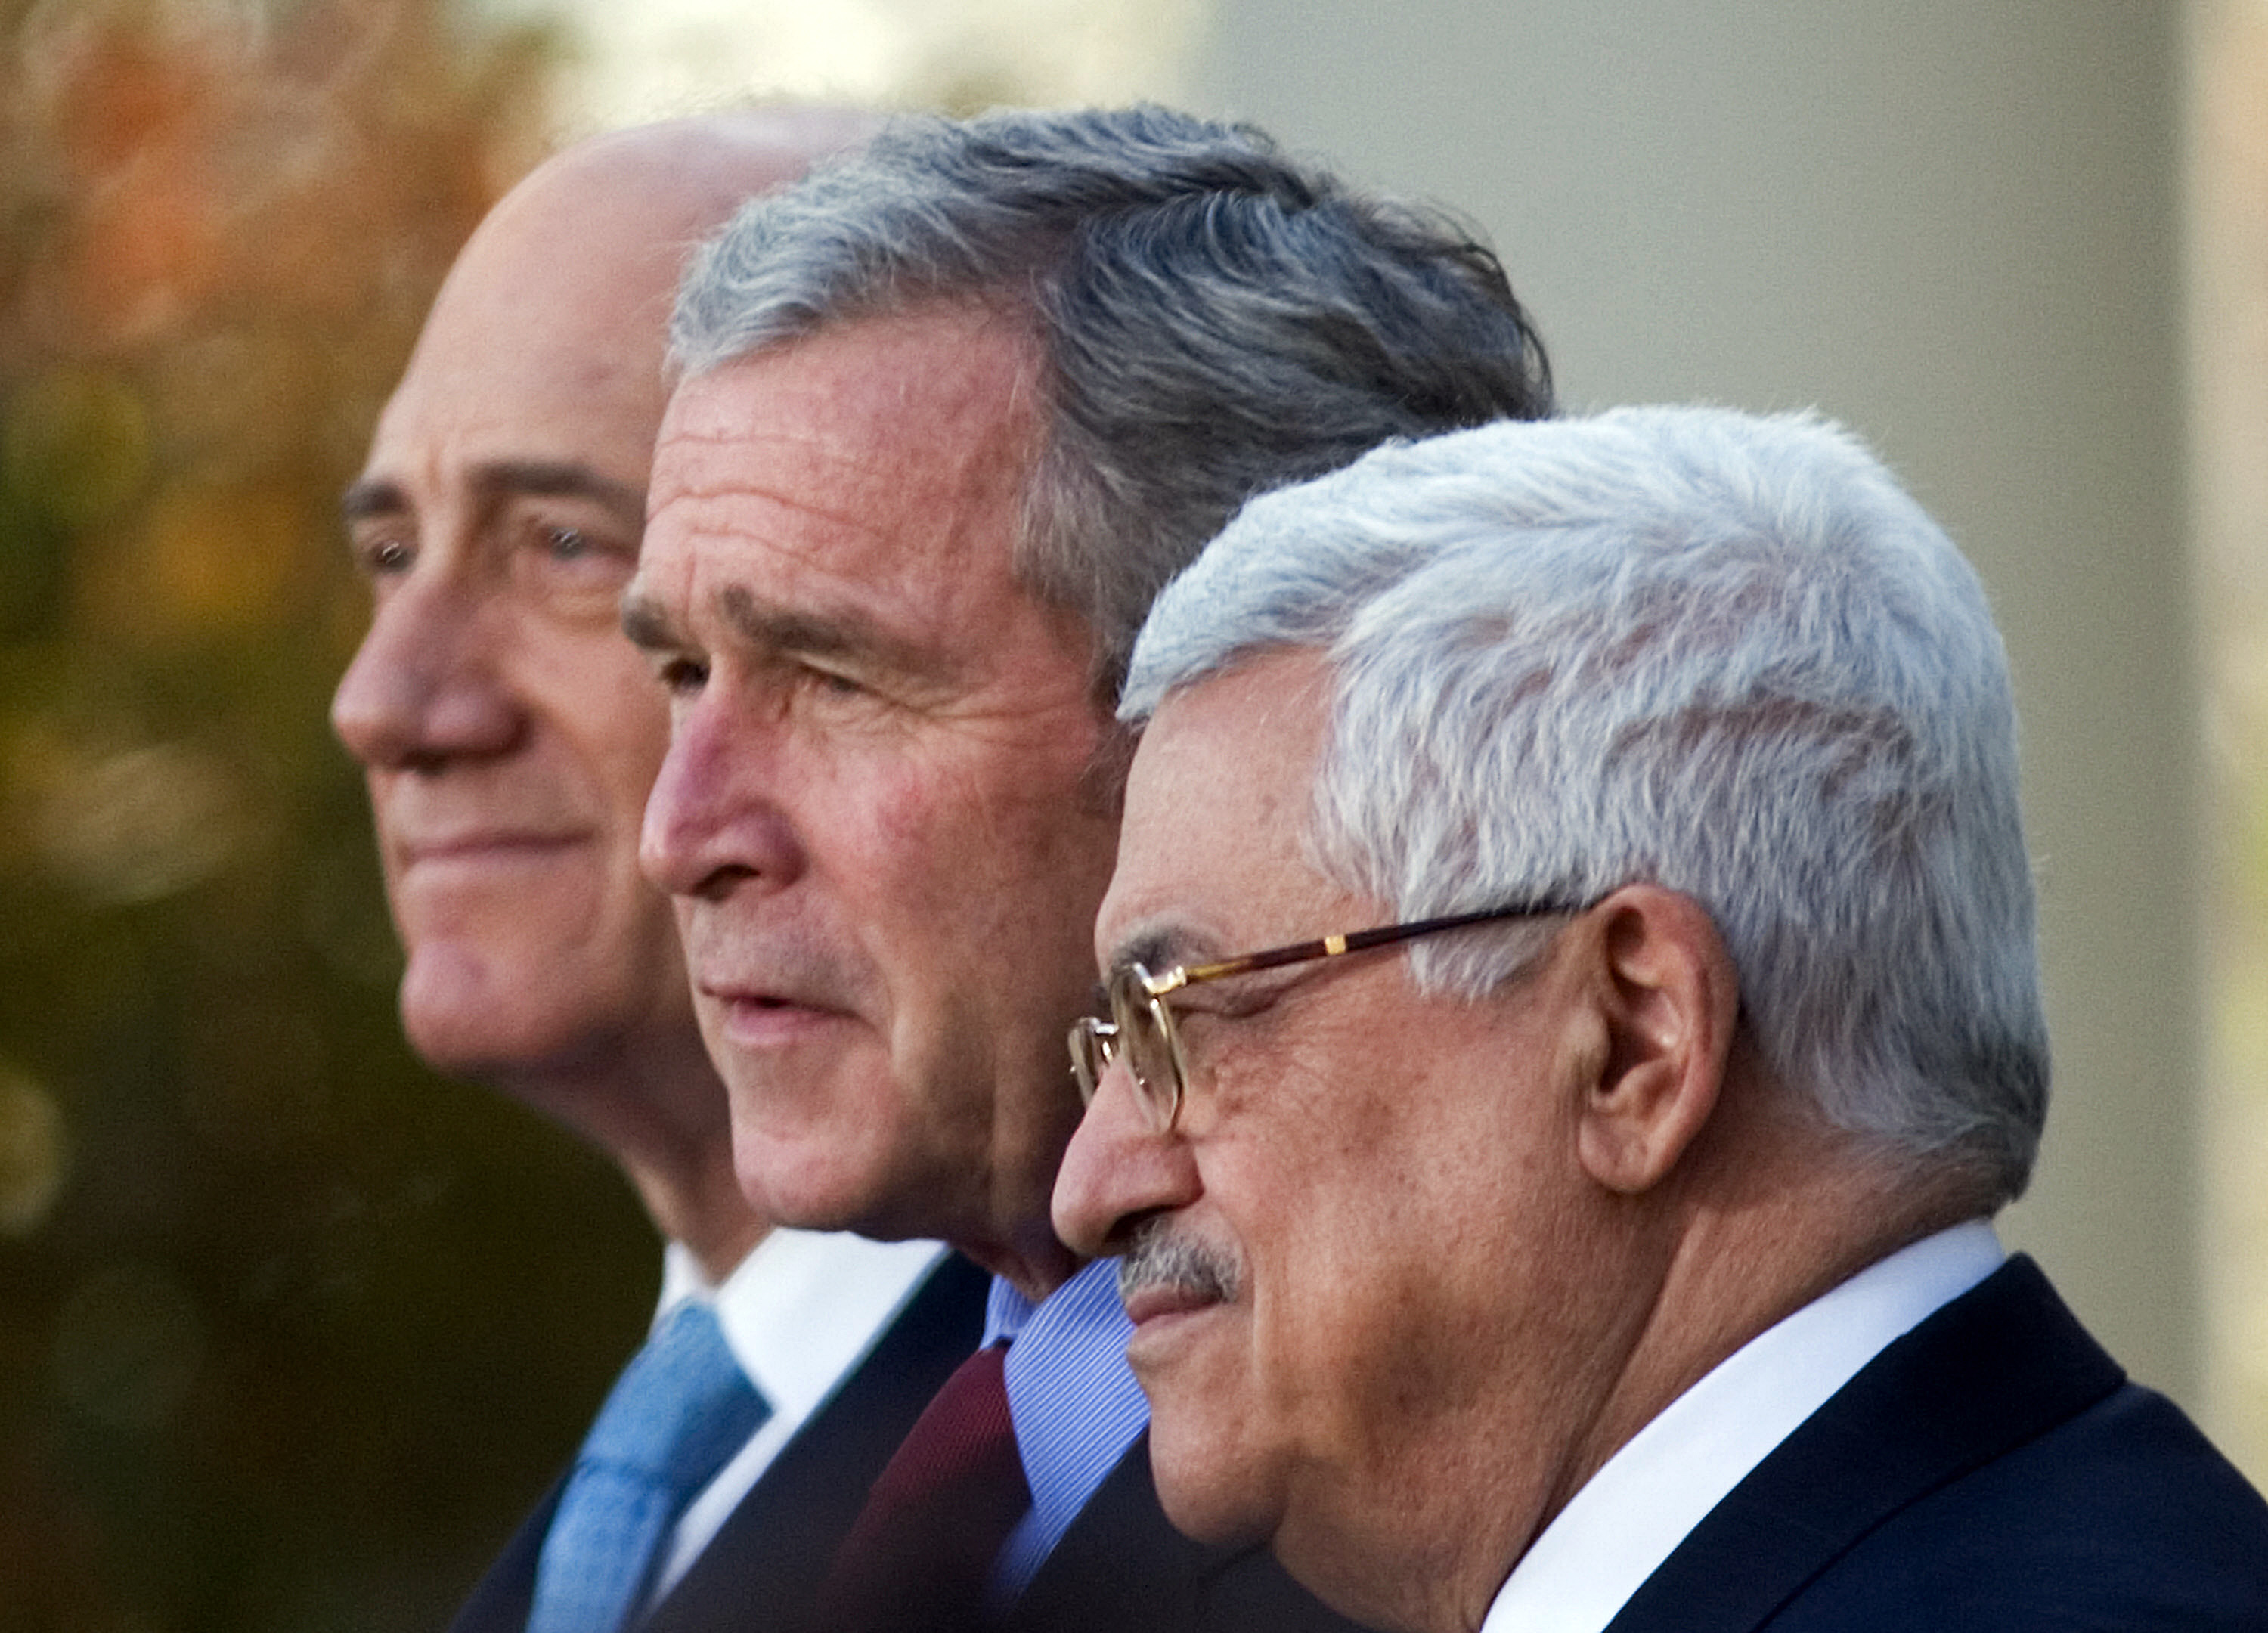 Photo above: U.S. President George W. Bush (C) speaks during a press conference with Israeli Prime Minister Ehud Olmert (L) and Palestinian President Mahmud Abbas on November 28, 2007 at the White House in Washington, D.C. Photo by MANDEL NGAN/AFP via Getty Images.